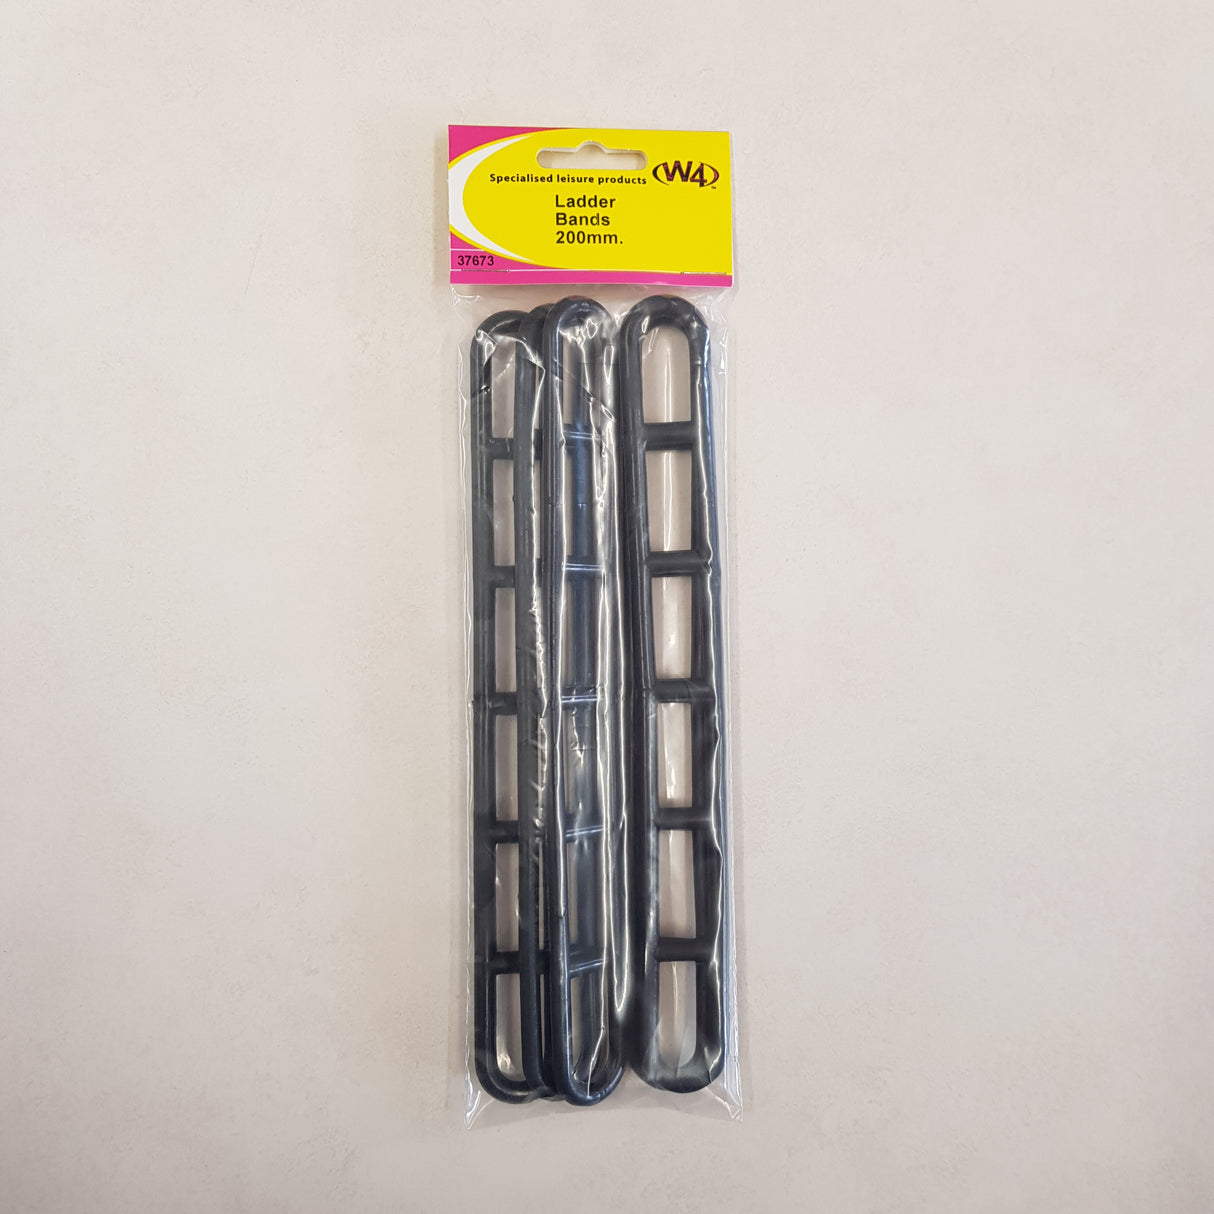 W4 Ladder Rubber Awning Fixings 5 pack